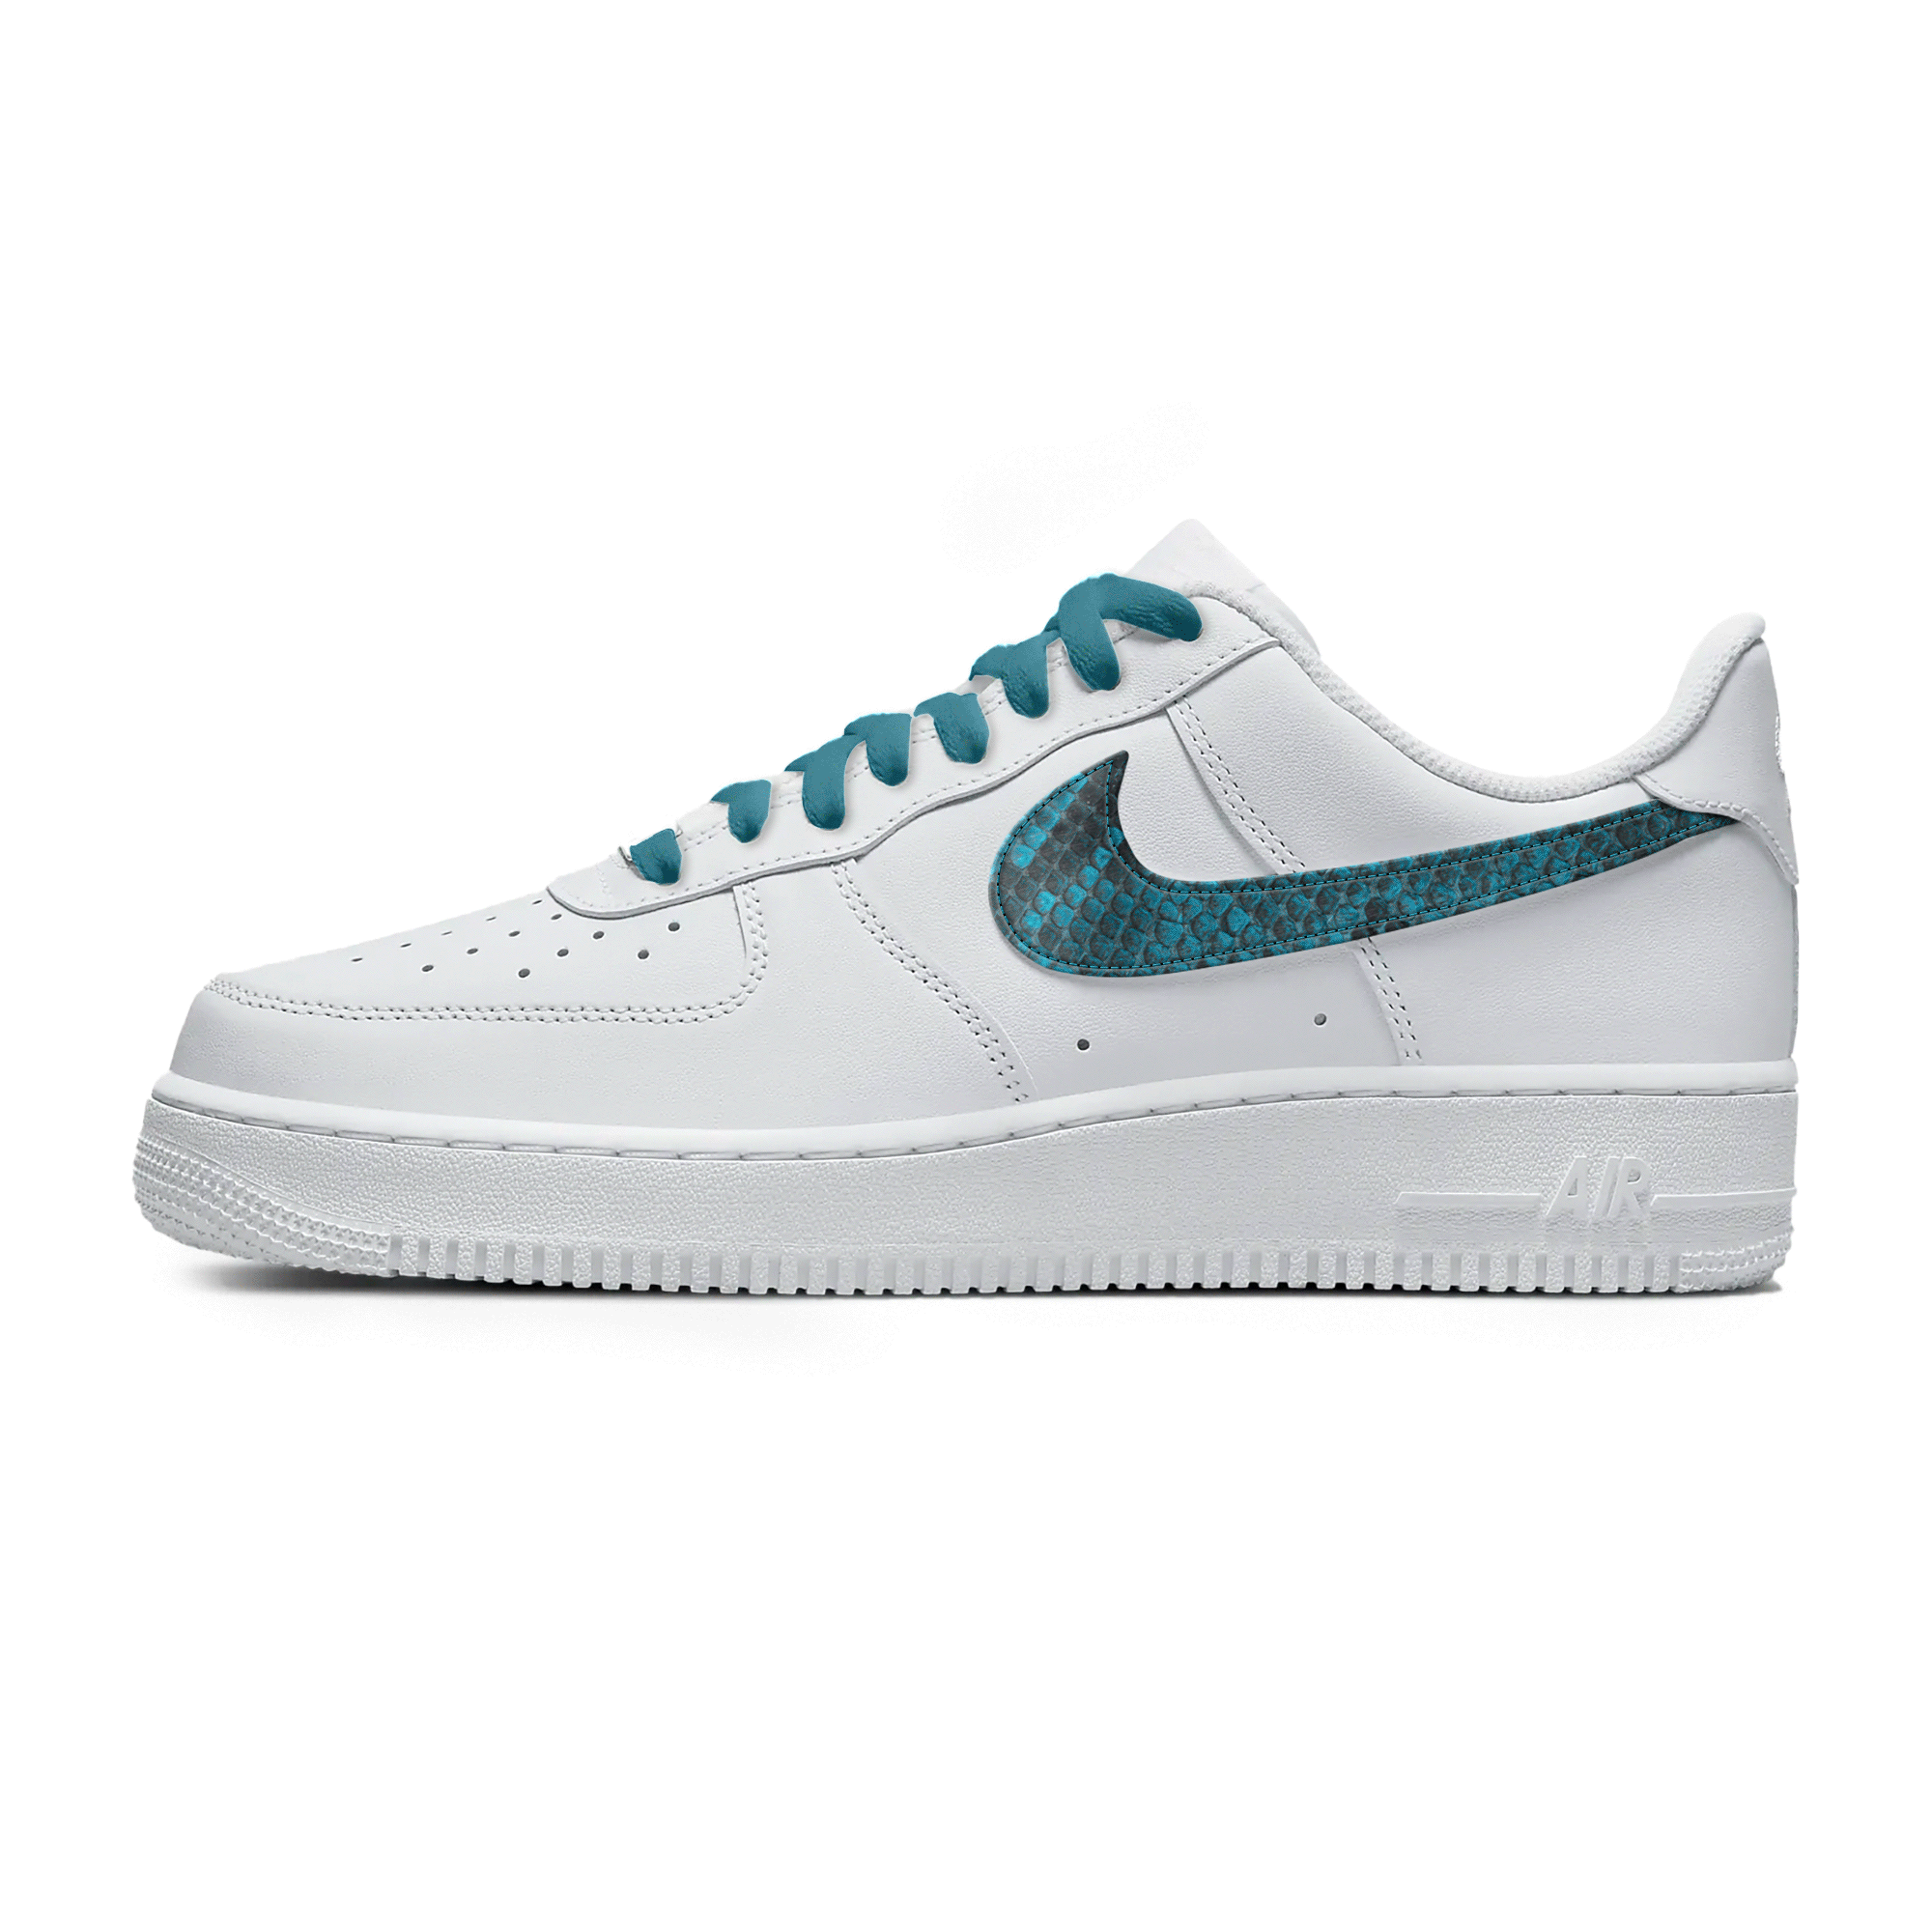 Nike Air Force 1 Sneakers - Custom leather Swoosh - Python